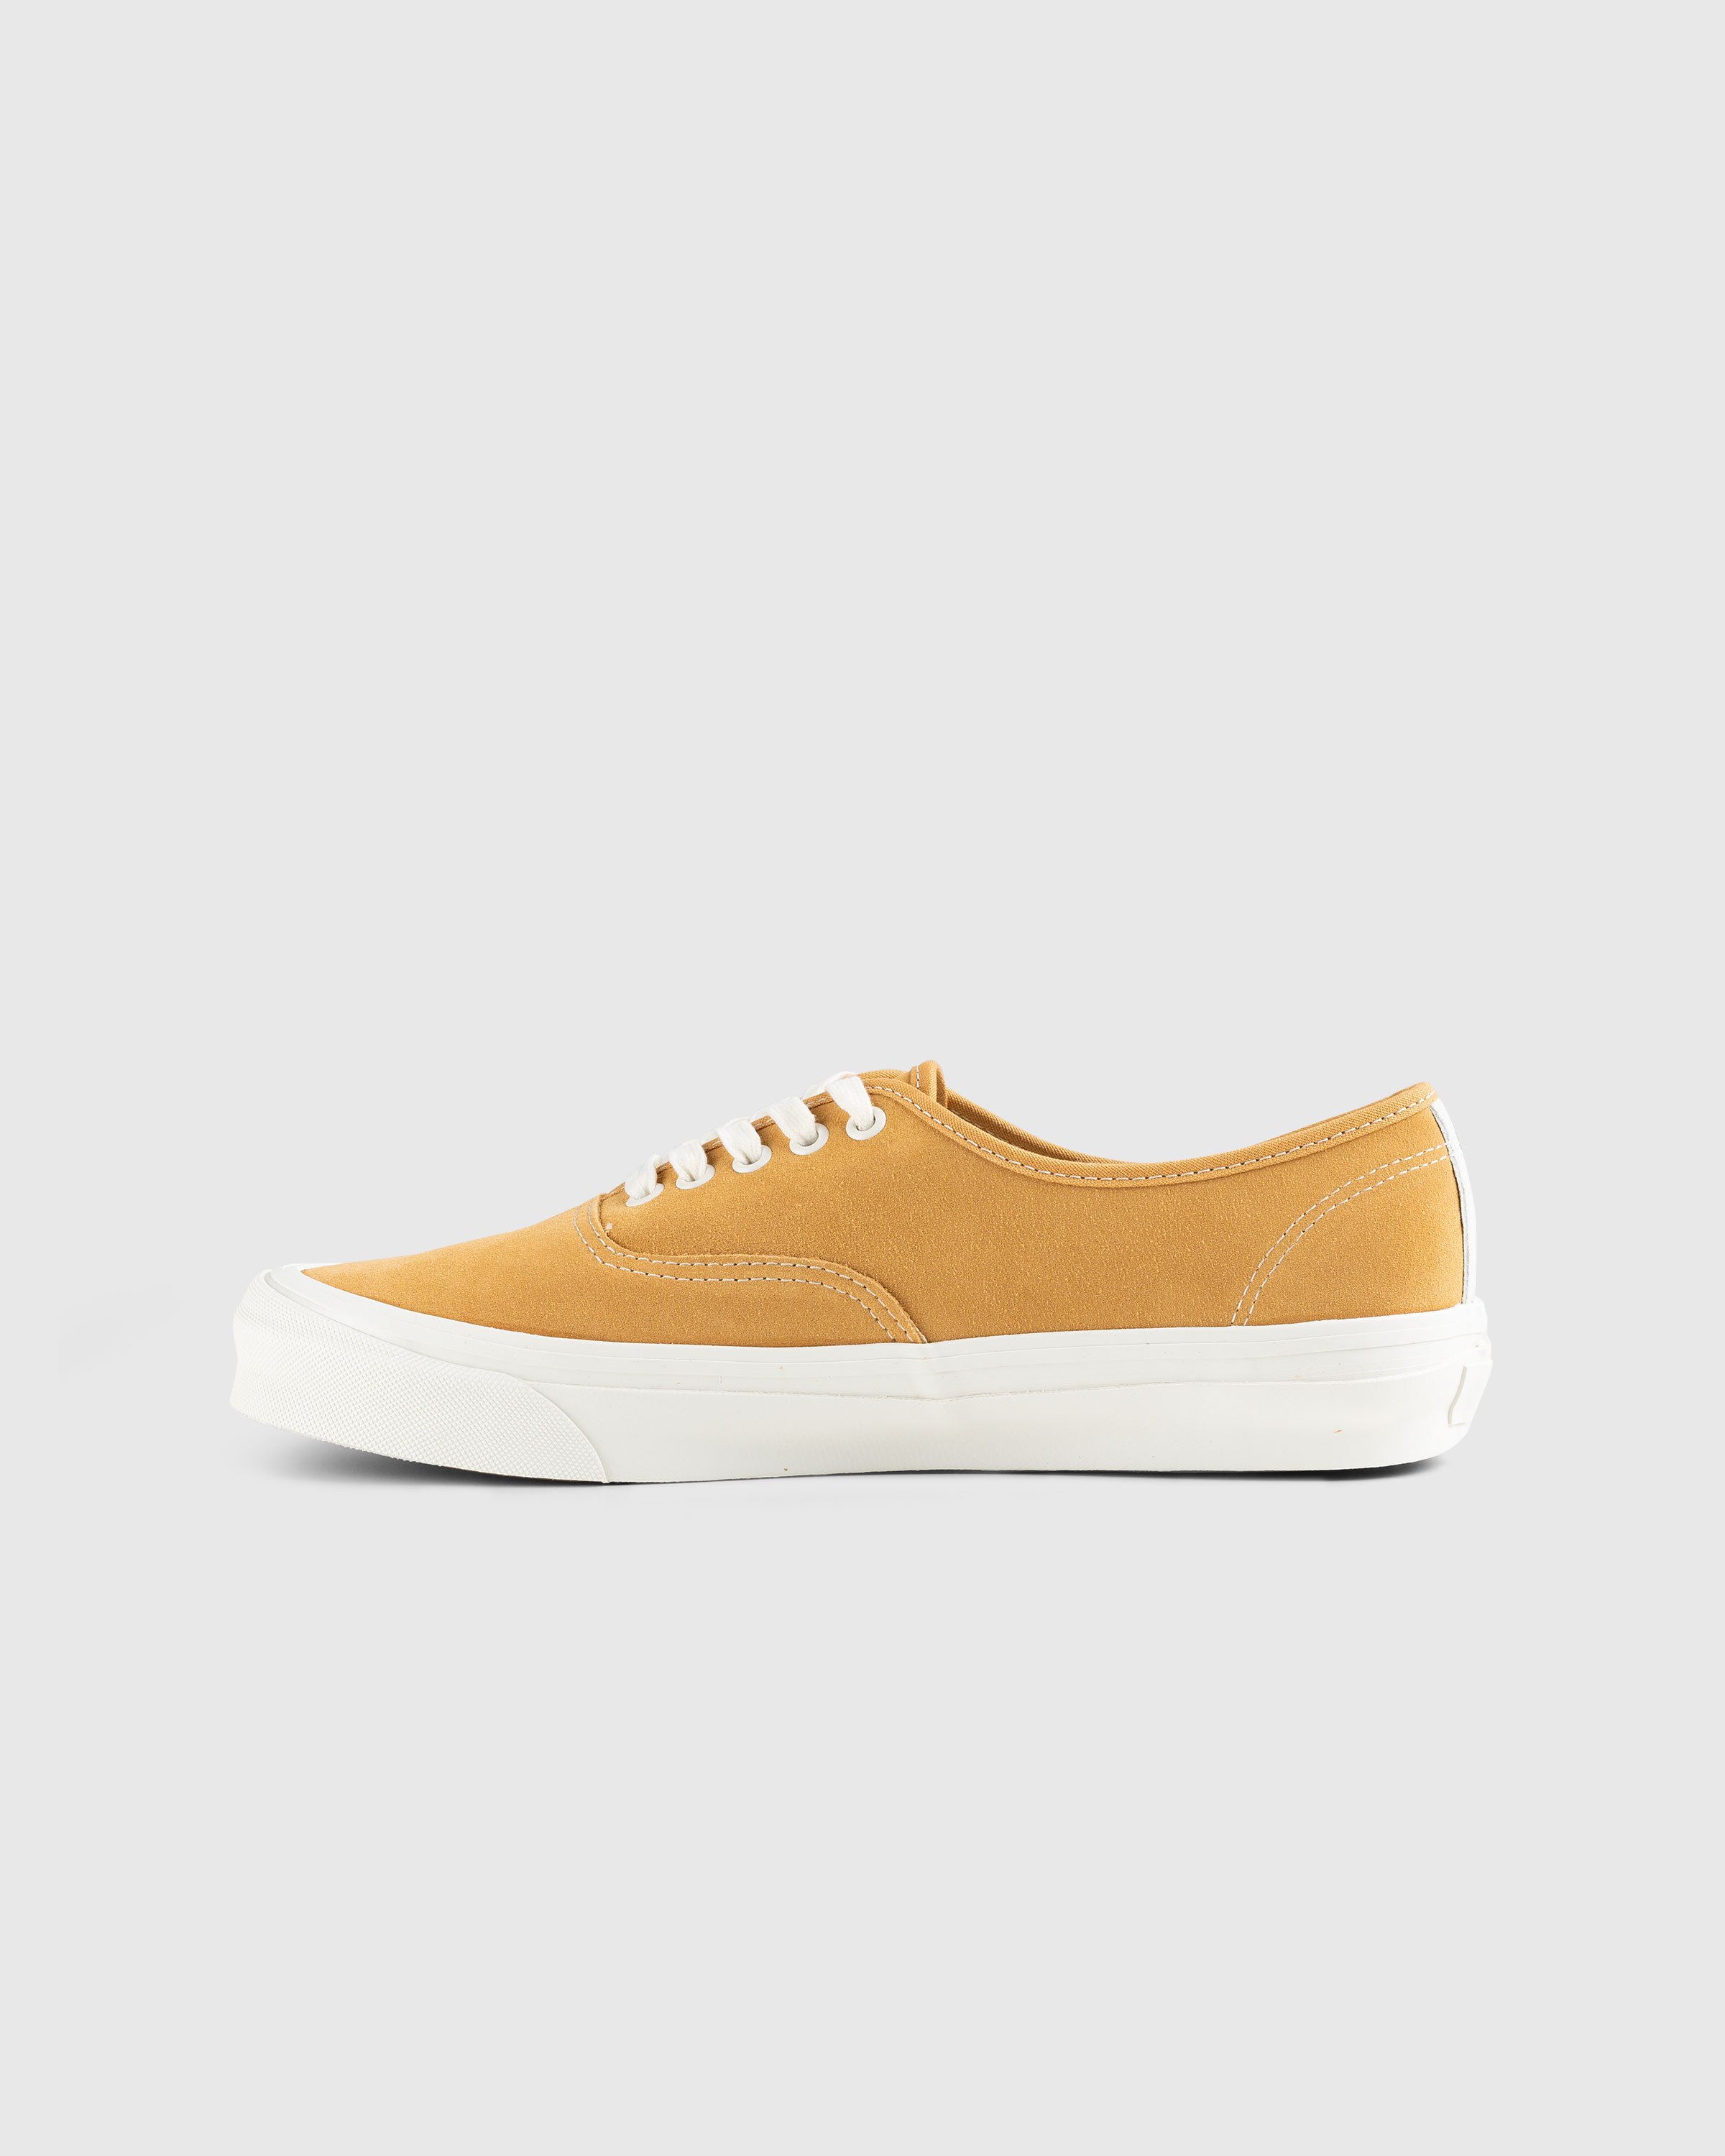 Vans - UA OG Authentic LX Suede Yellow - Footwear - Yellow - Image 2